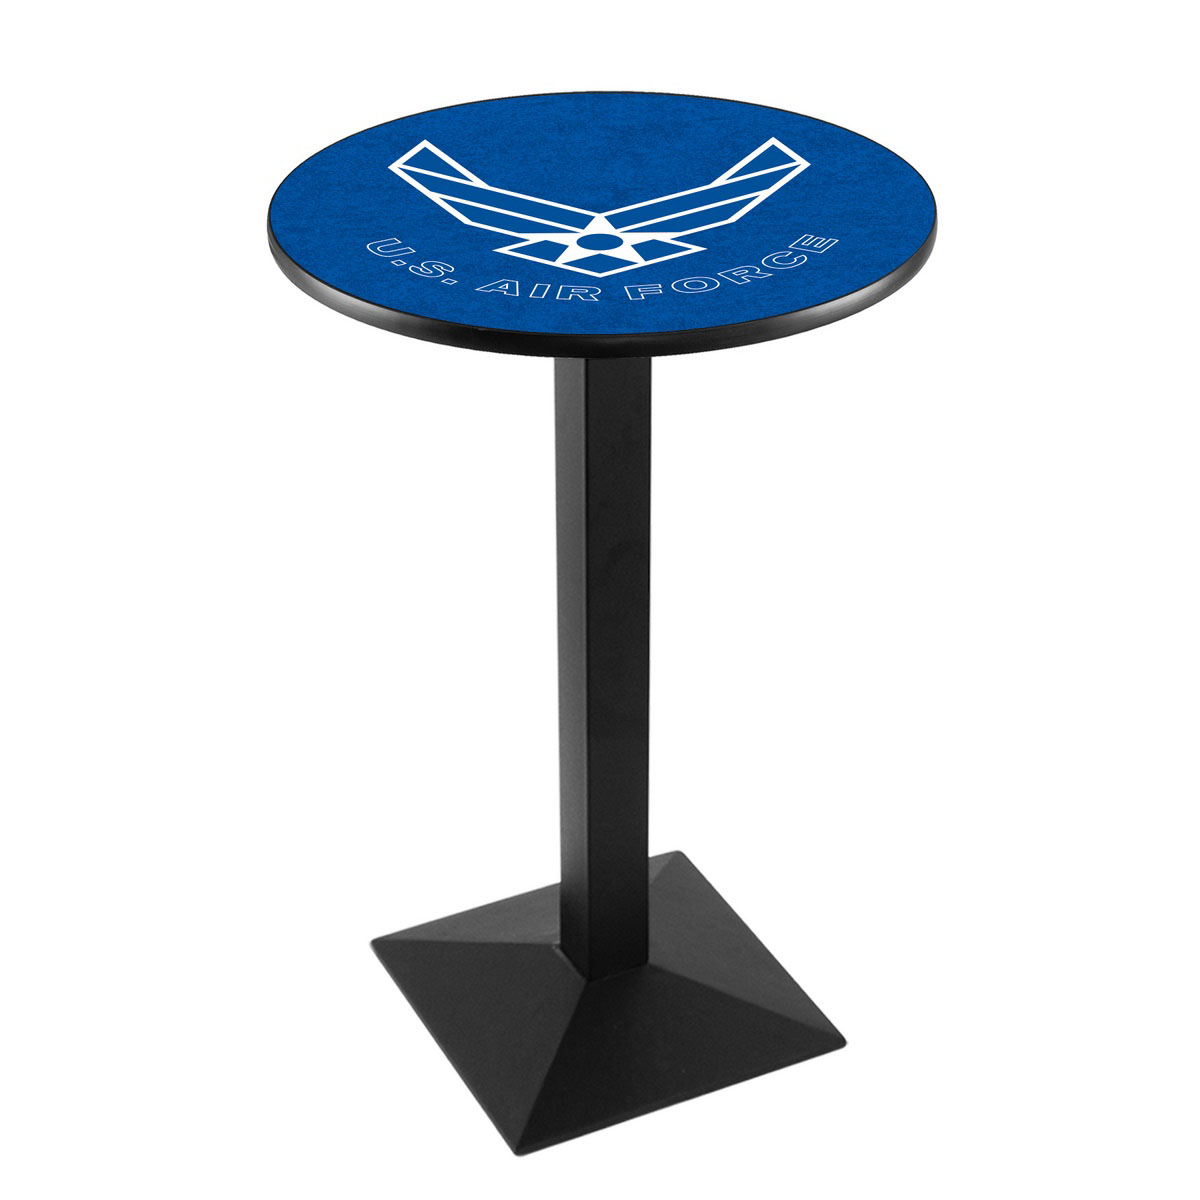 United States Air Force Logo Pub Bar Table With Square Stand